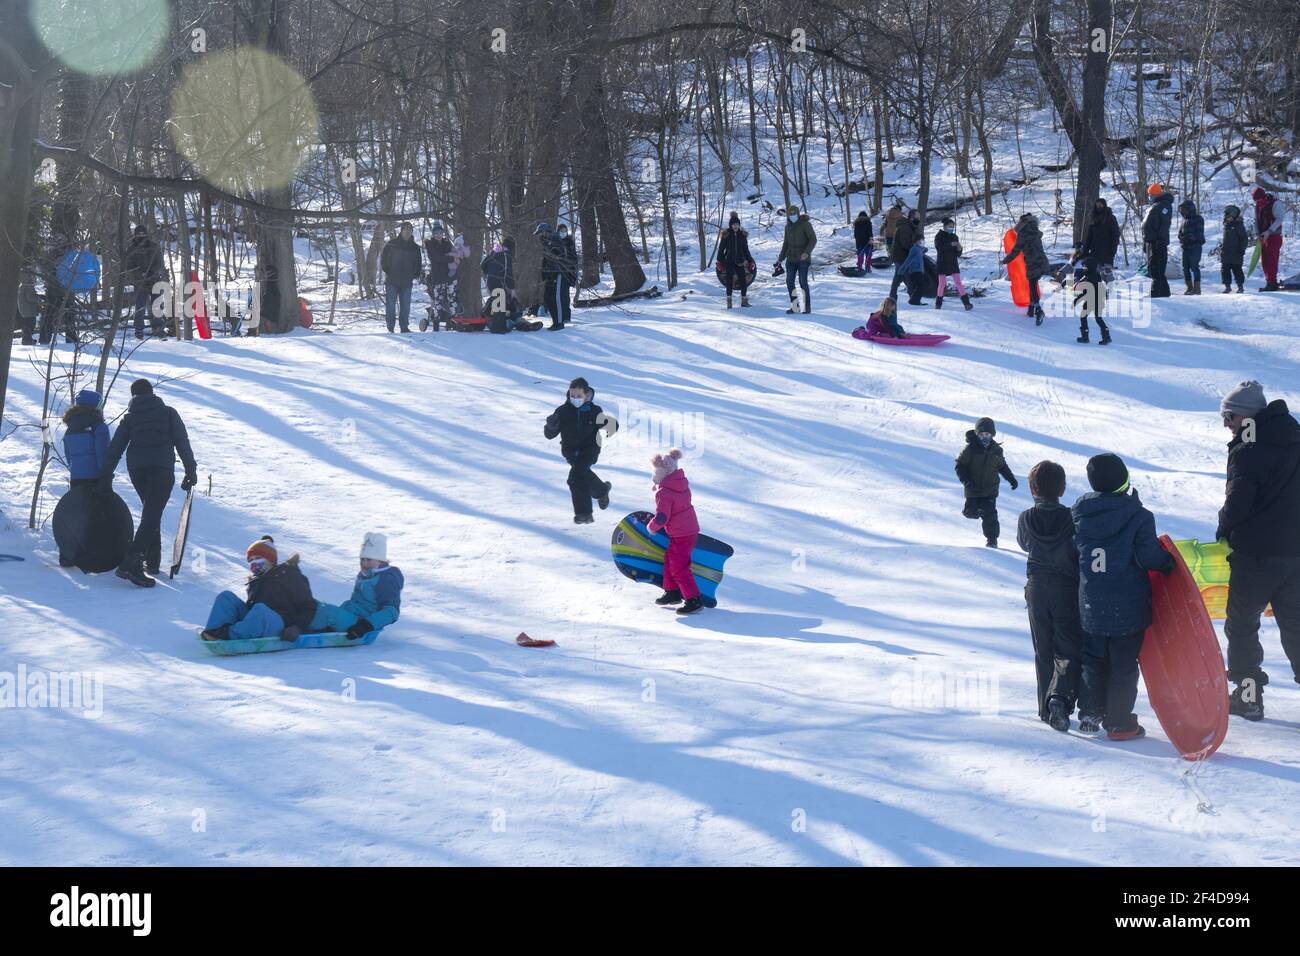 Children and families enjoying a day sledding in Prospect Park after a recent winter snow storm in Brooklyn, New York. Stock Photo